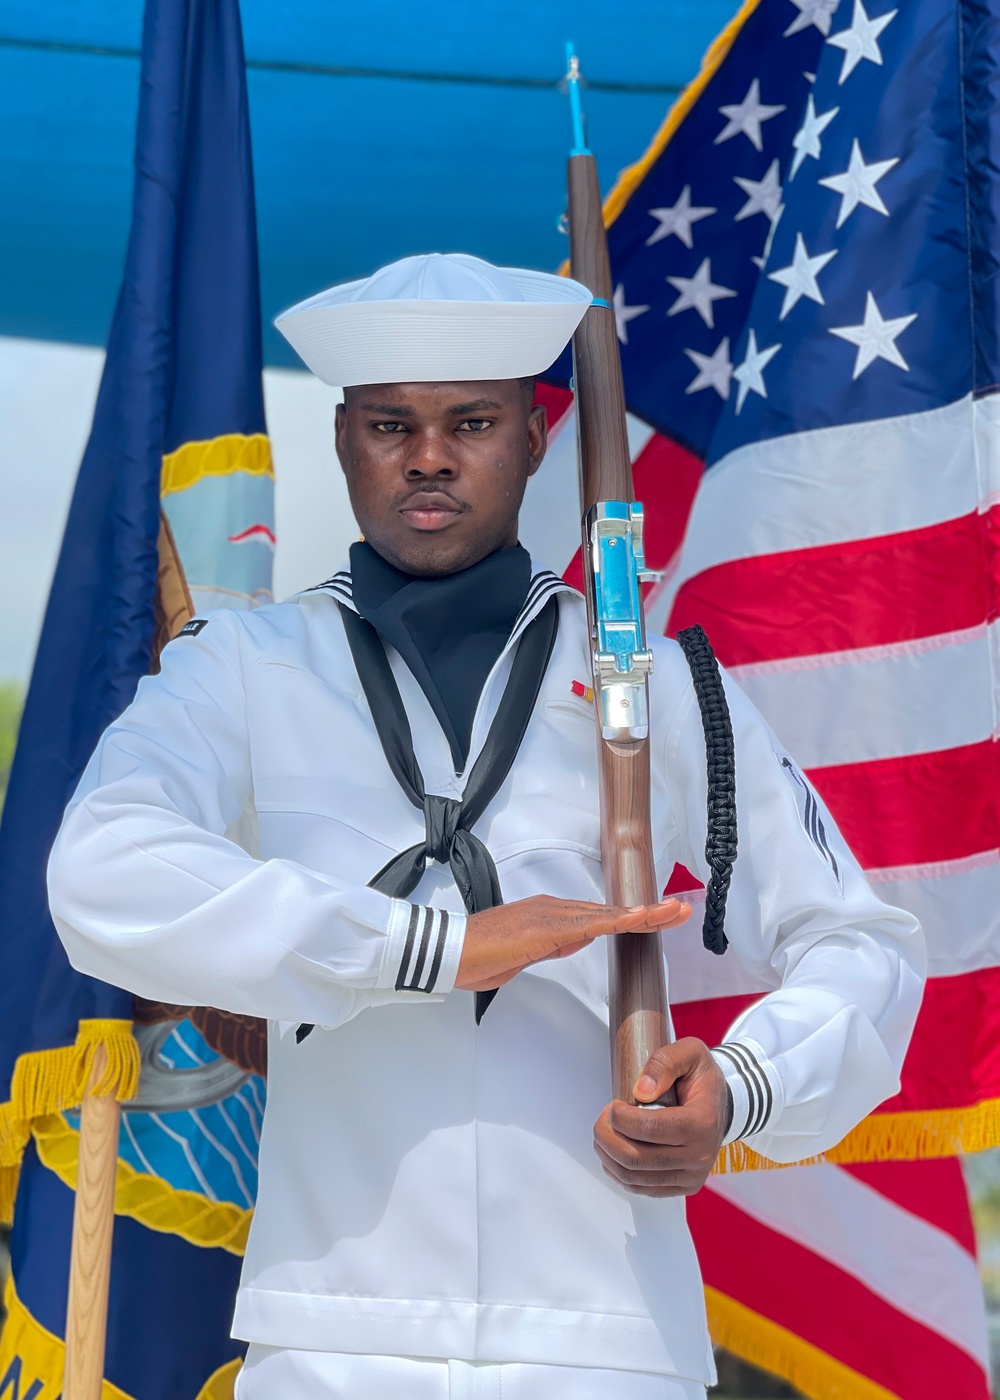 Every Sailor a Recruiter: Turning Experiences into Opportunities